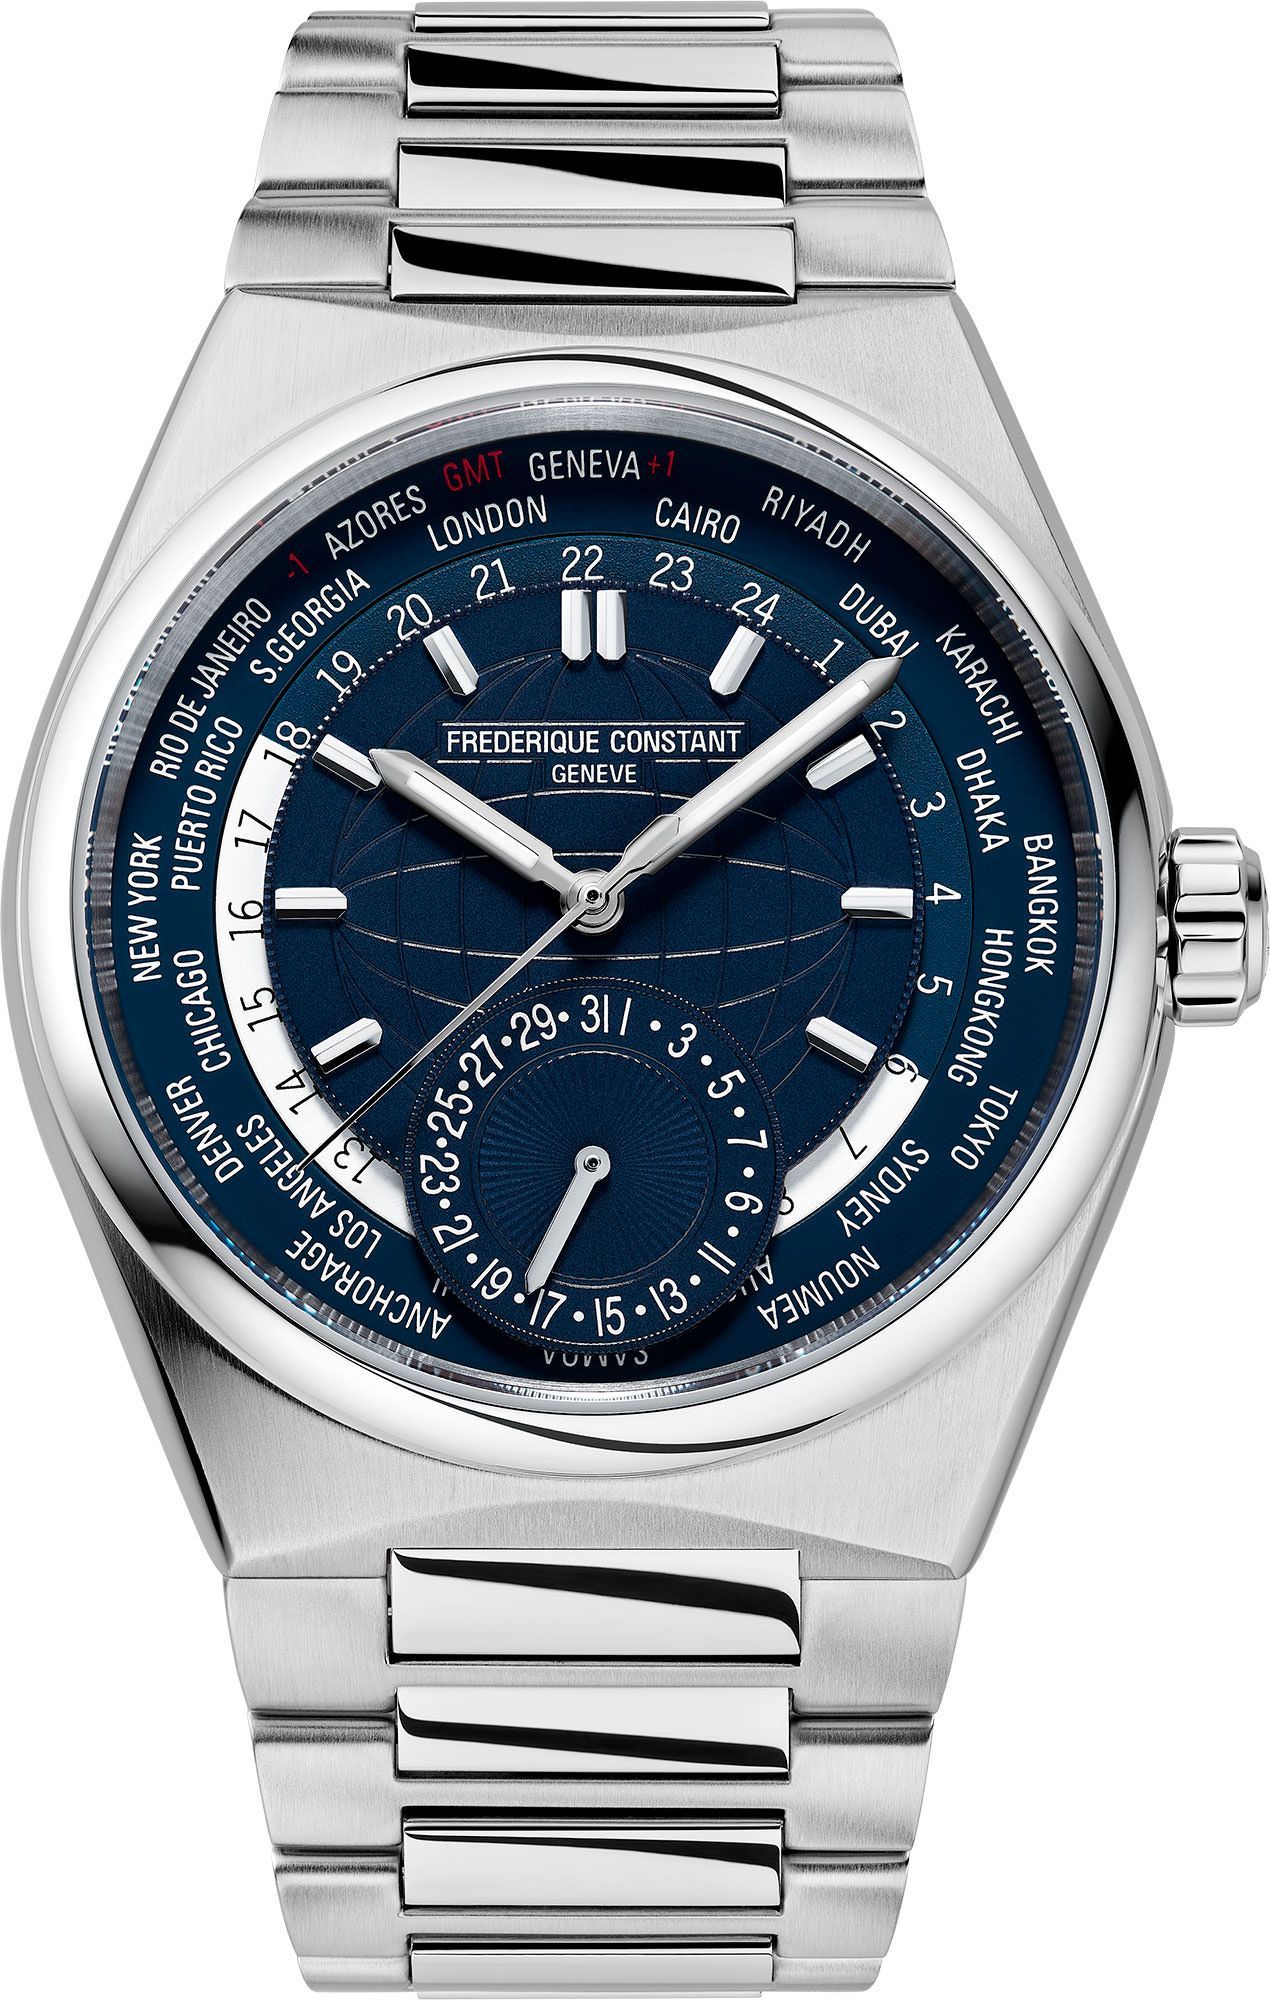 Frederique Constant Highlife WorldTimer Manufacture 41 mm Watch in Blue Dial For Men - 1